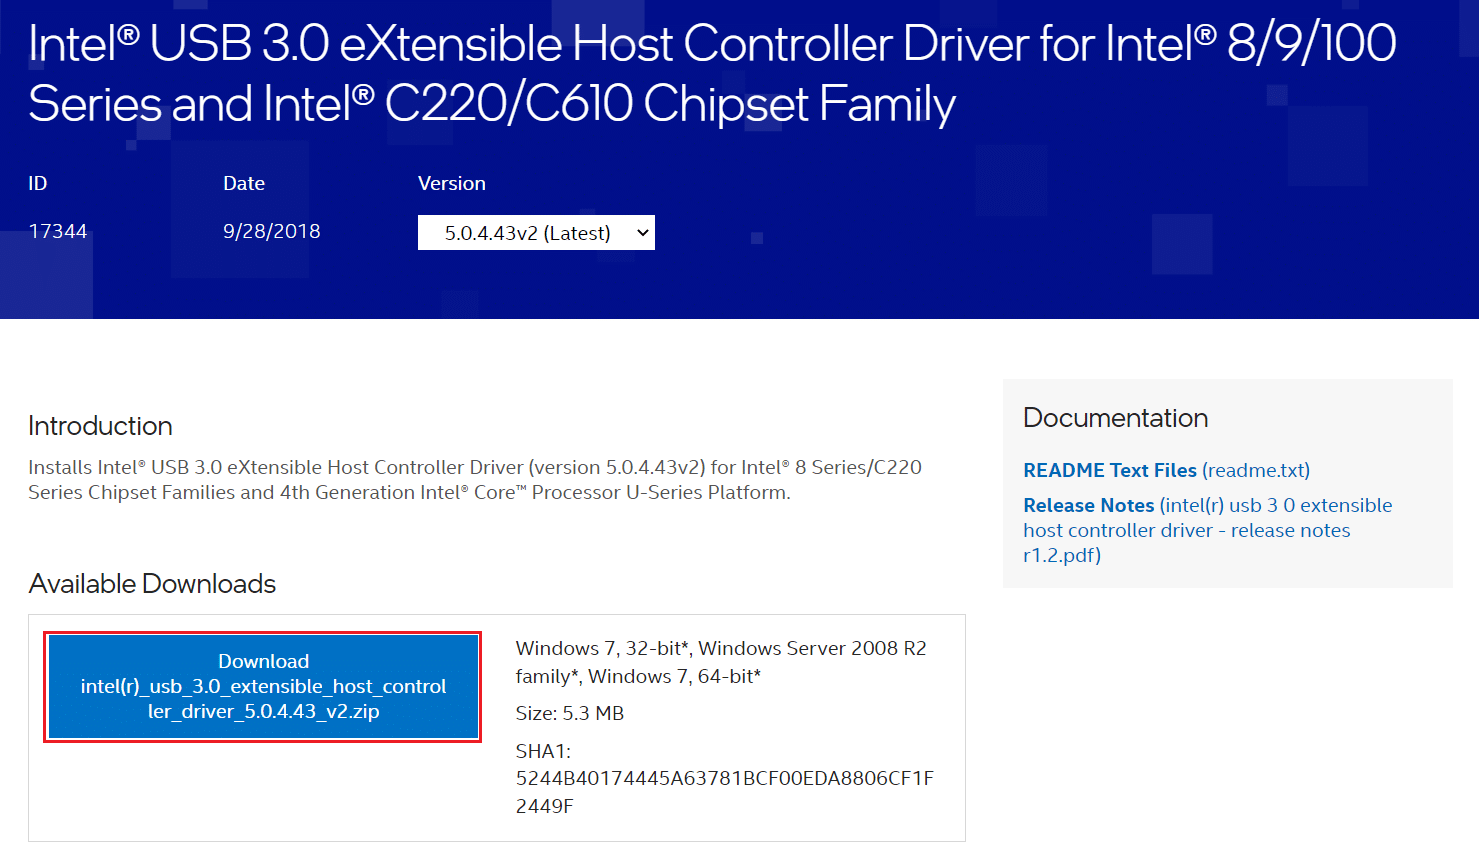 intel USB 3.9 extensible host controller official download page